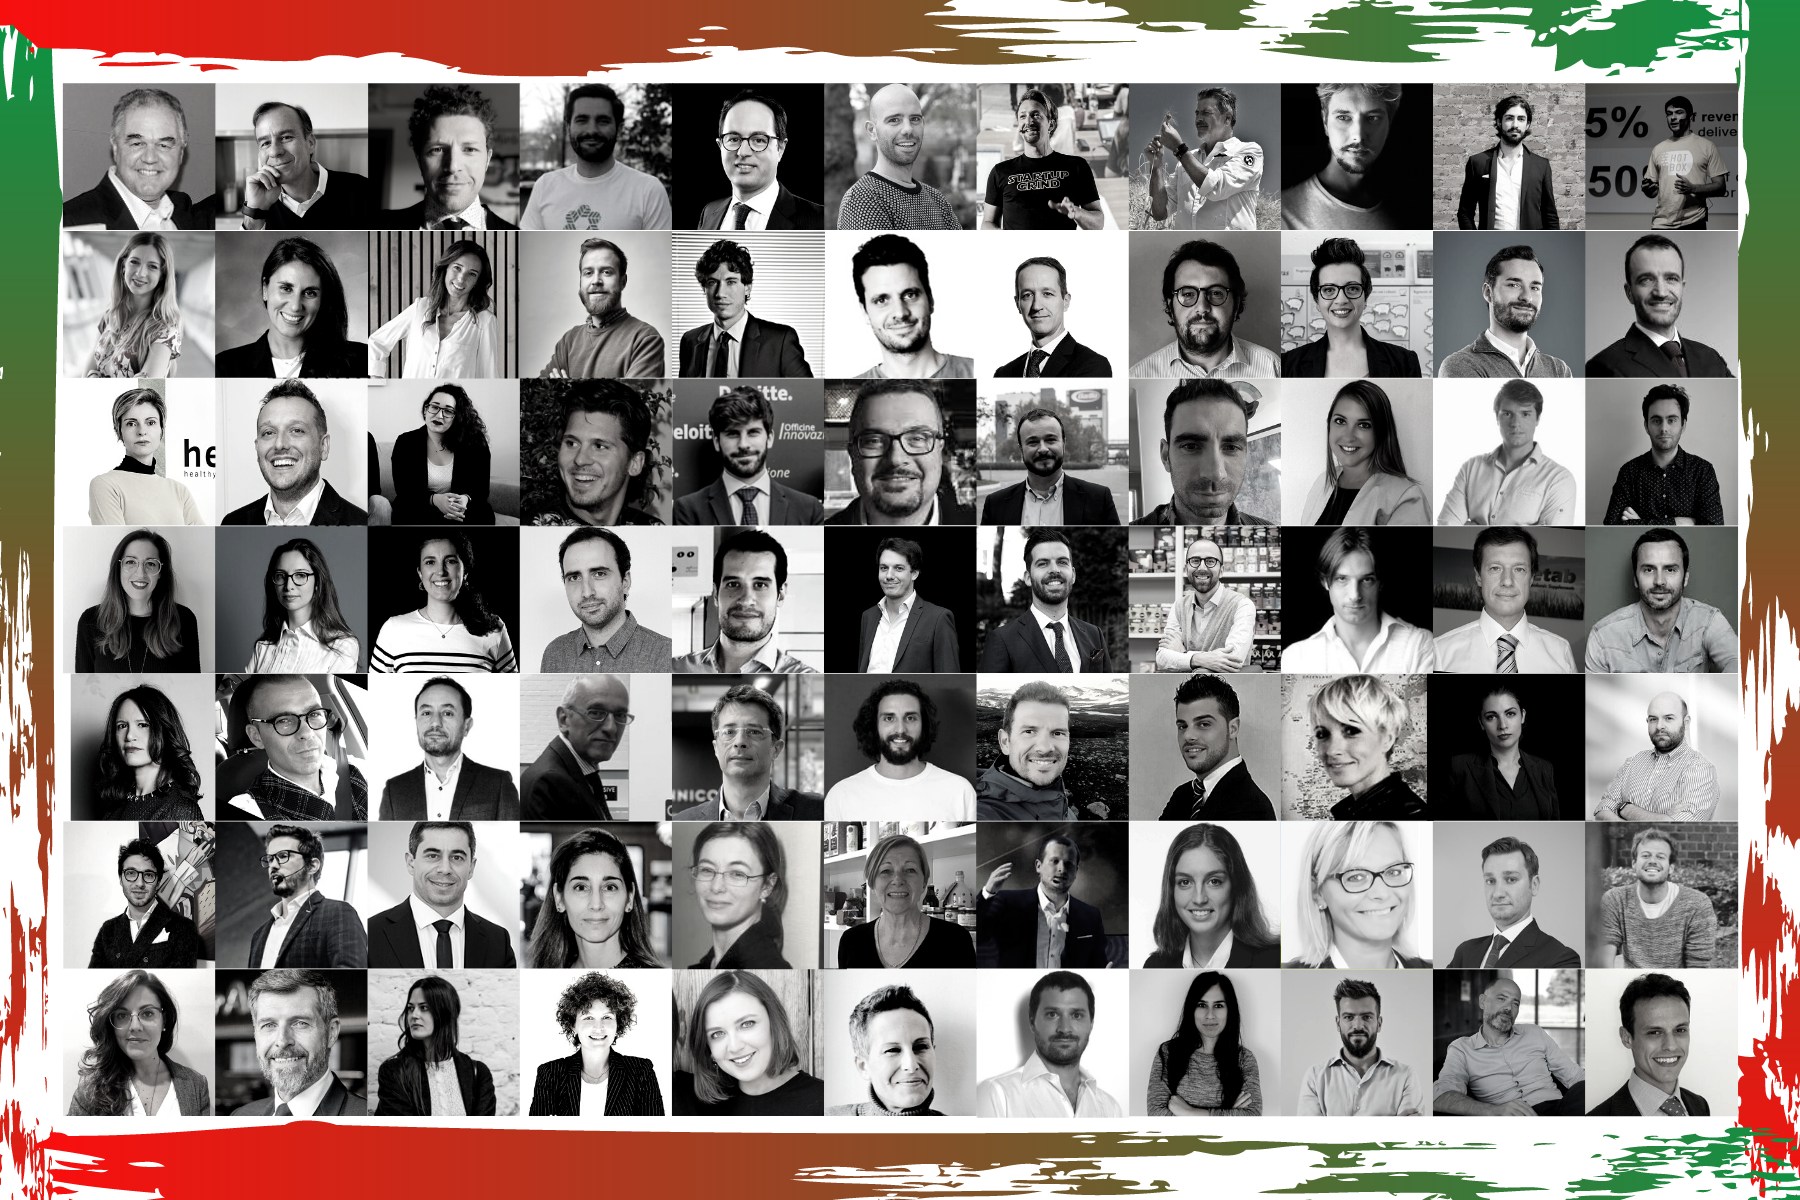 THE 77 ITALIAN FOODTECH INFLUENCERS TO WATCH IN 2021